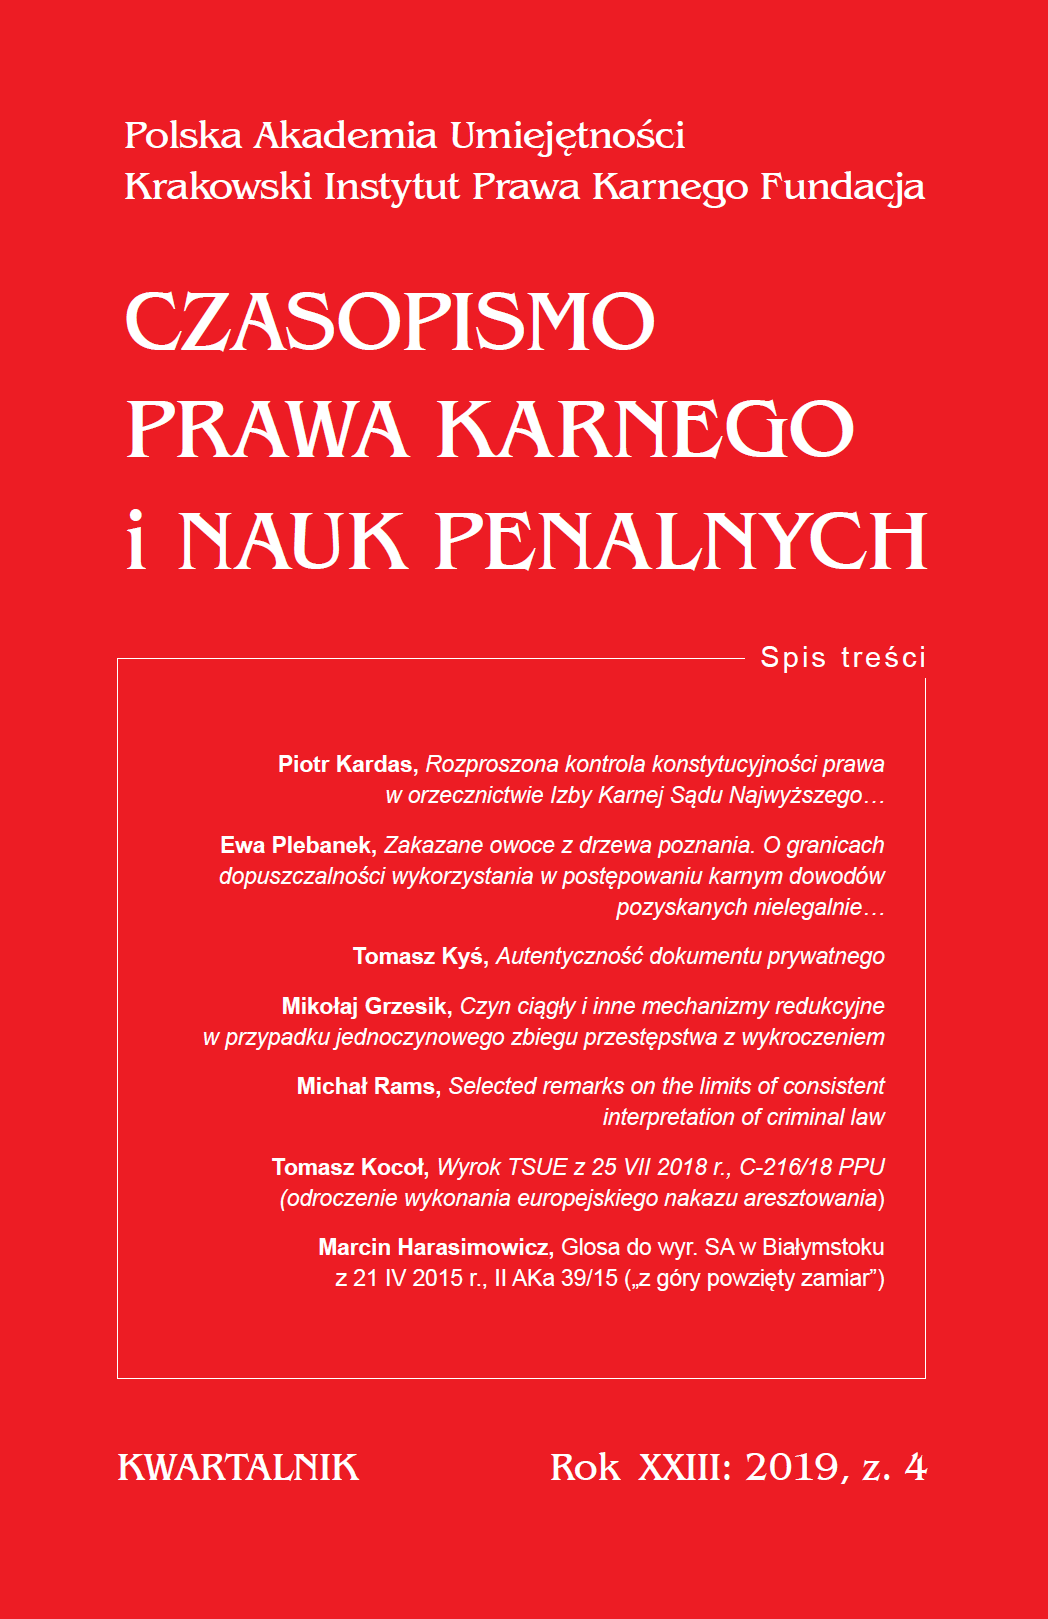 Adjudication of Financial Administrative Sanctions in the Context of the Violation of the So-Called COVID Acts and Regulations, and Liability for Petty Offenses (in the View of the ne bis in idem Principle) Cover Image